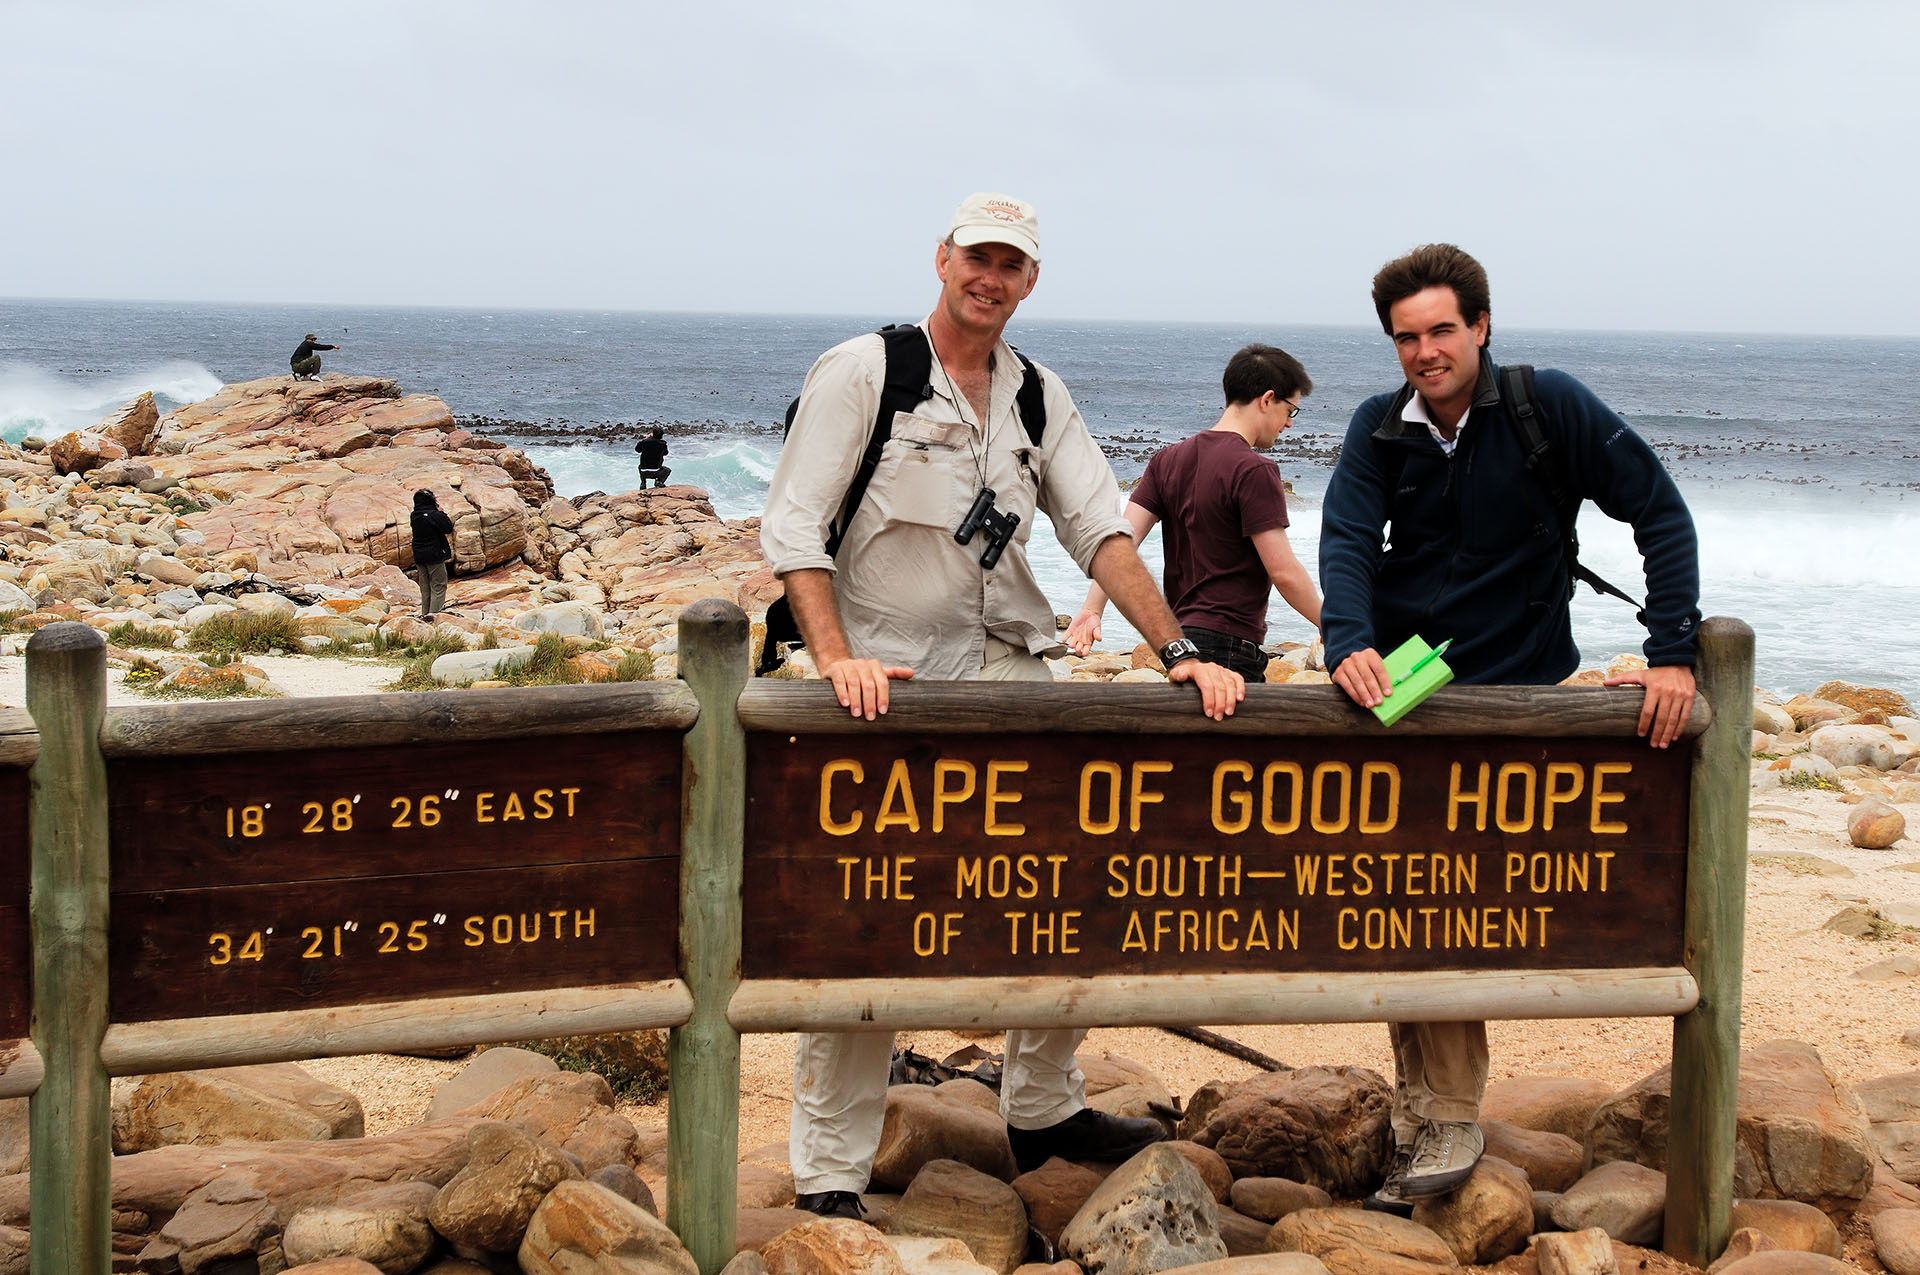 On assignment in South Africa for the Dutch travel magazine ANWB Reizen, with Matthijs de Winter. At Cape of Good Hope.